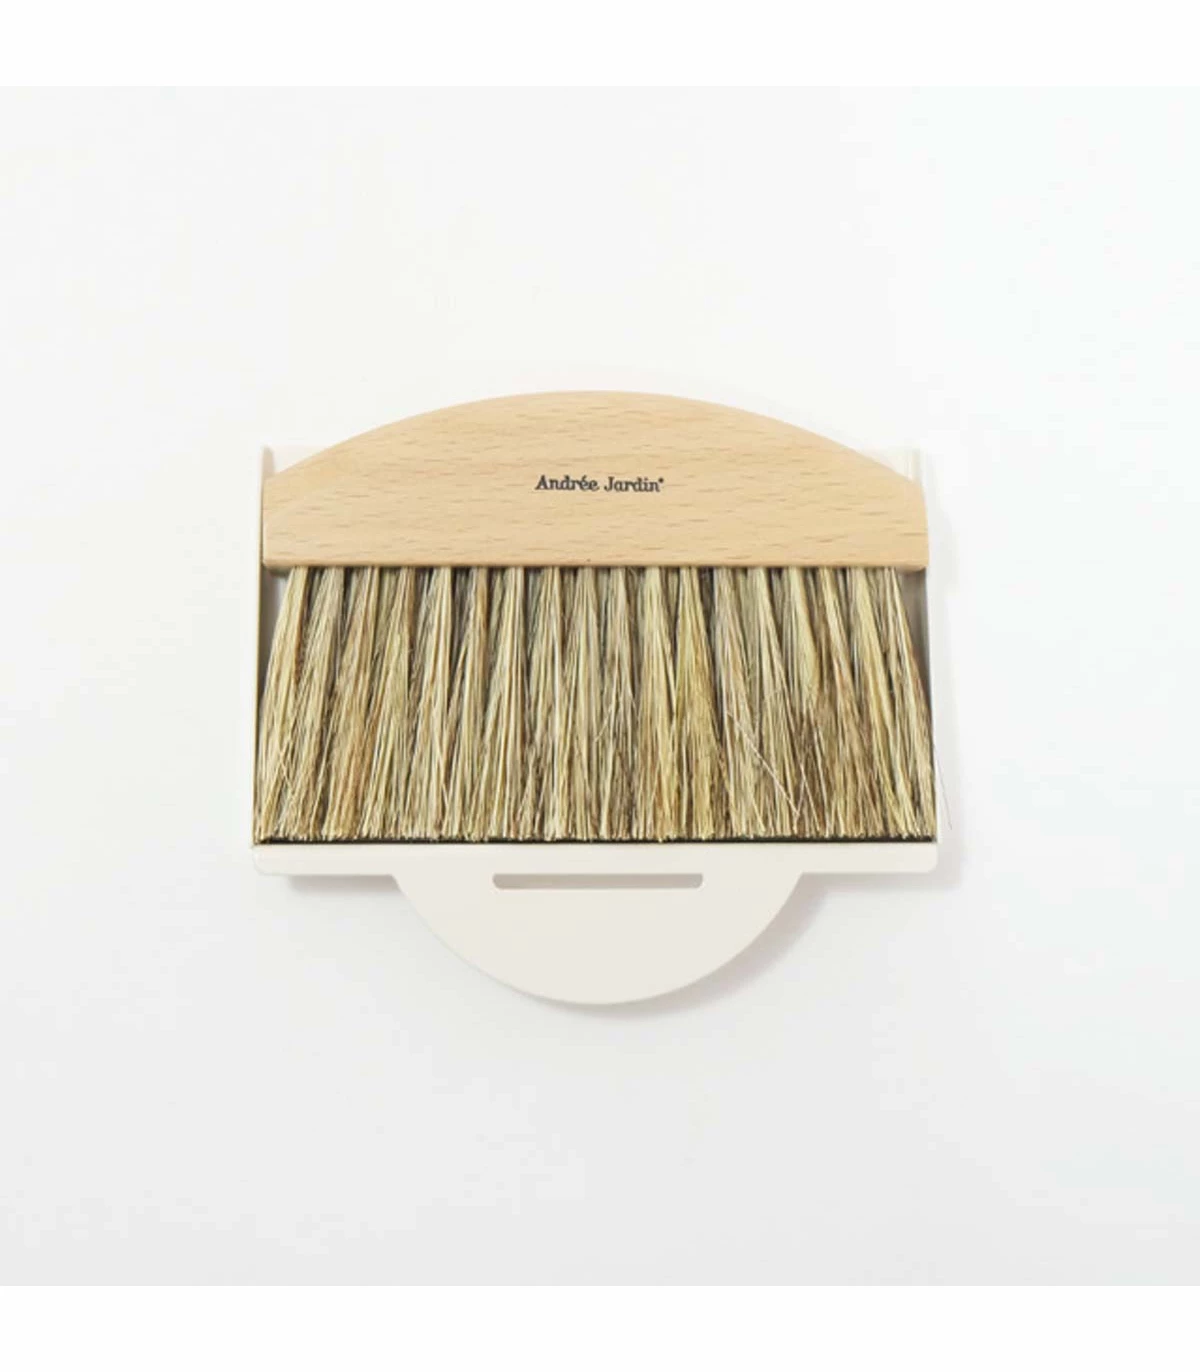 Andrée Jardin Table Crumb Sweeper - Cynk Nature